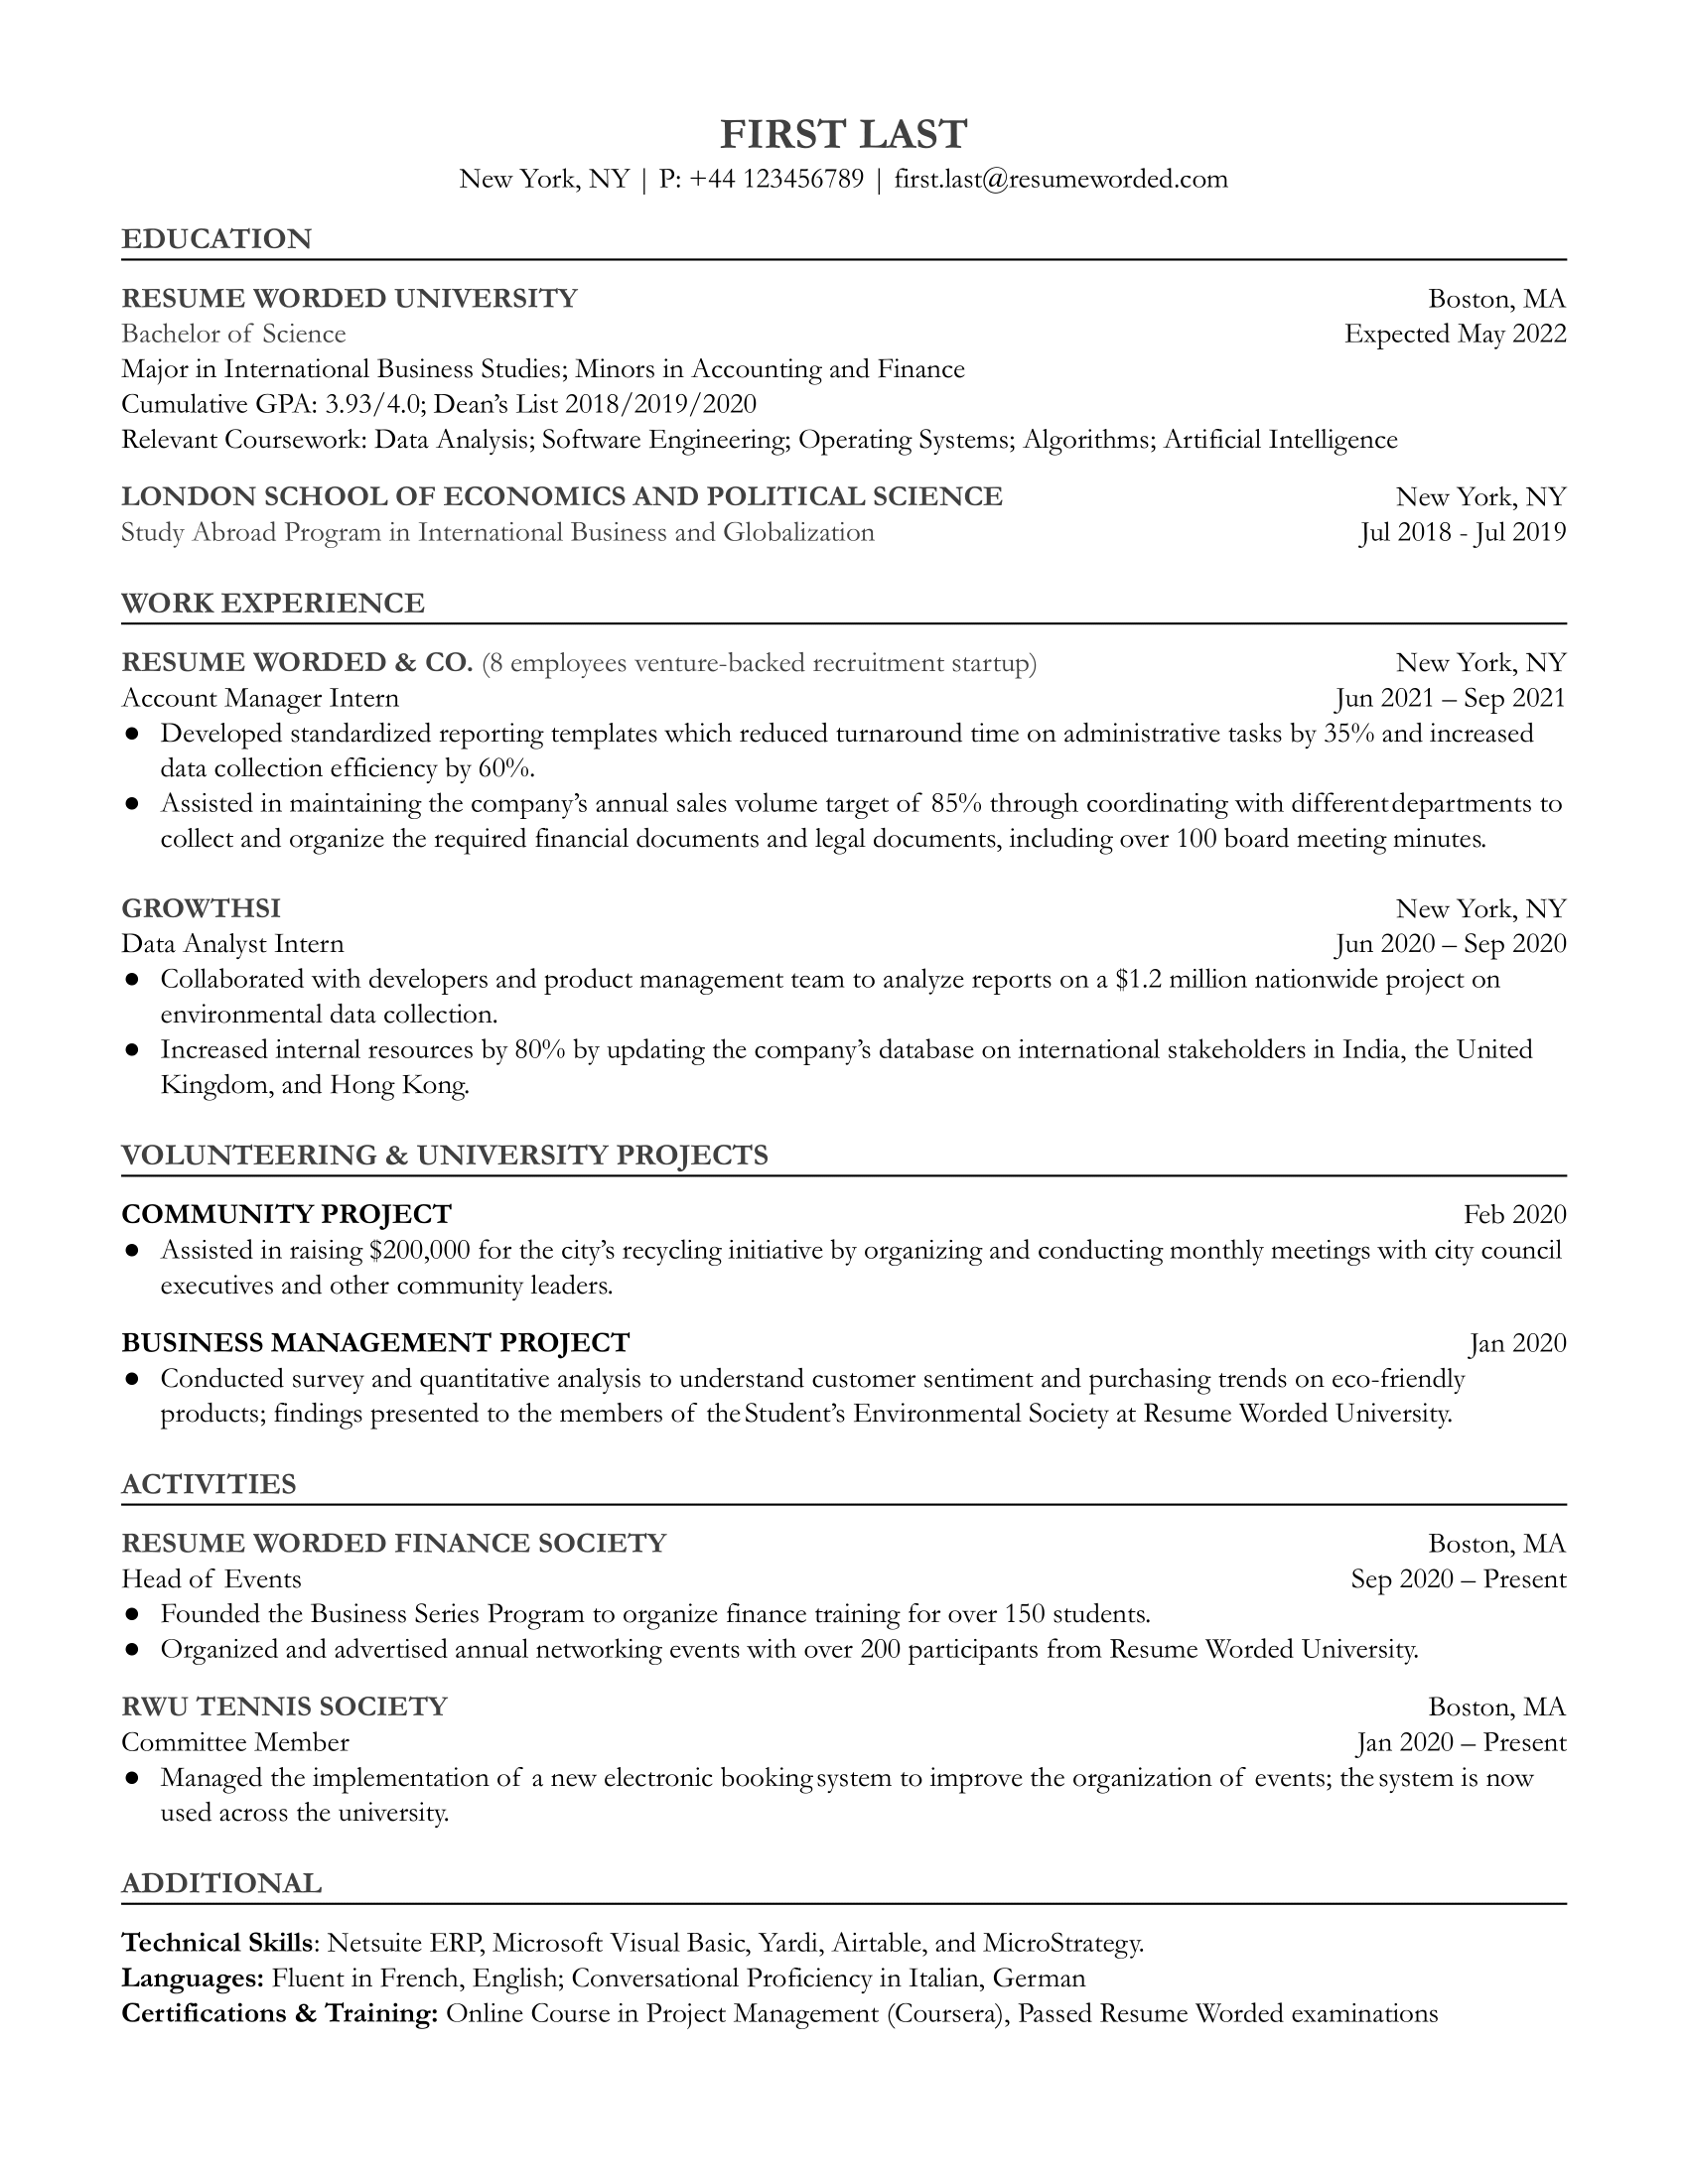 Resume of an Entry-Level Account Manager with emphasis on communication, negotiation, and problem-solving abilities.